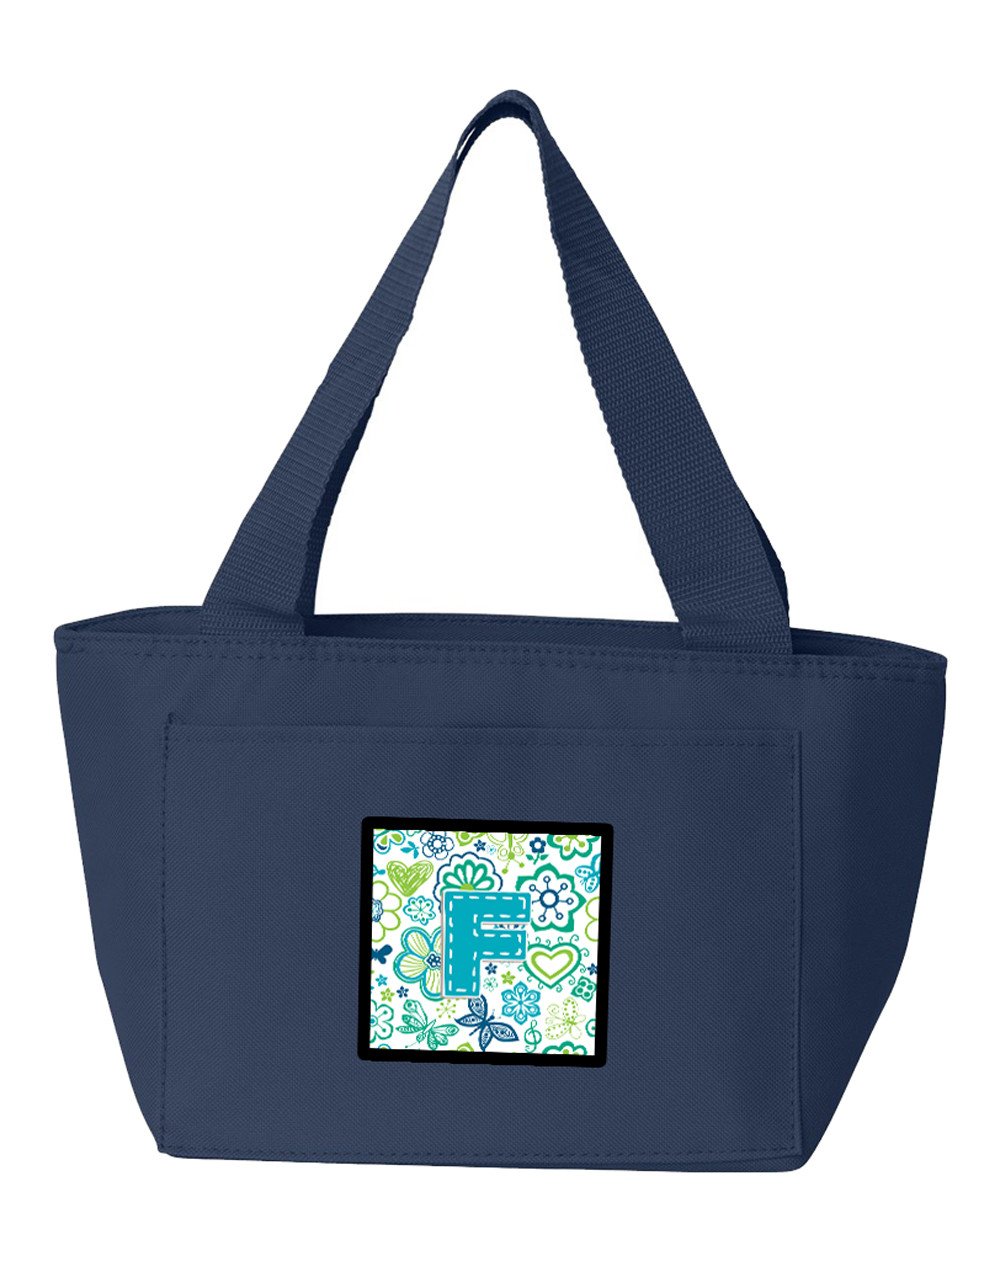 Letter F Flowers and Butterflies Teal Blue Lunch Bag CJ2006-FNA-8808 by Caroline's Treasures